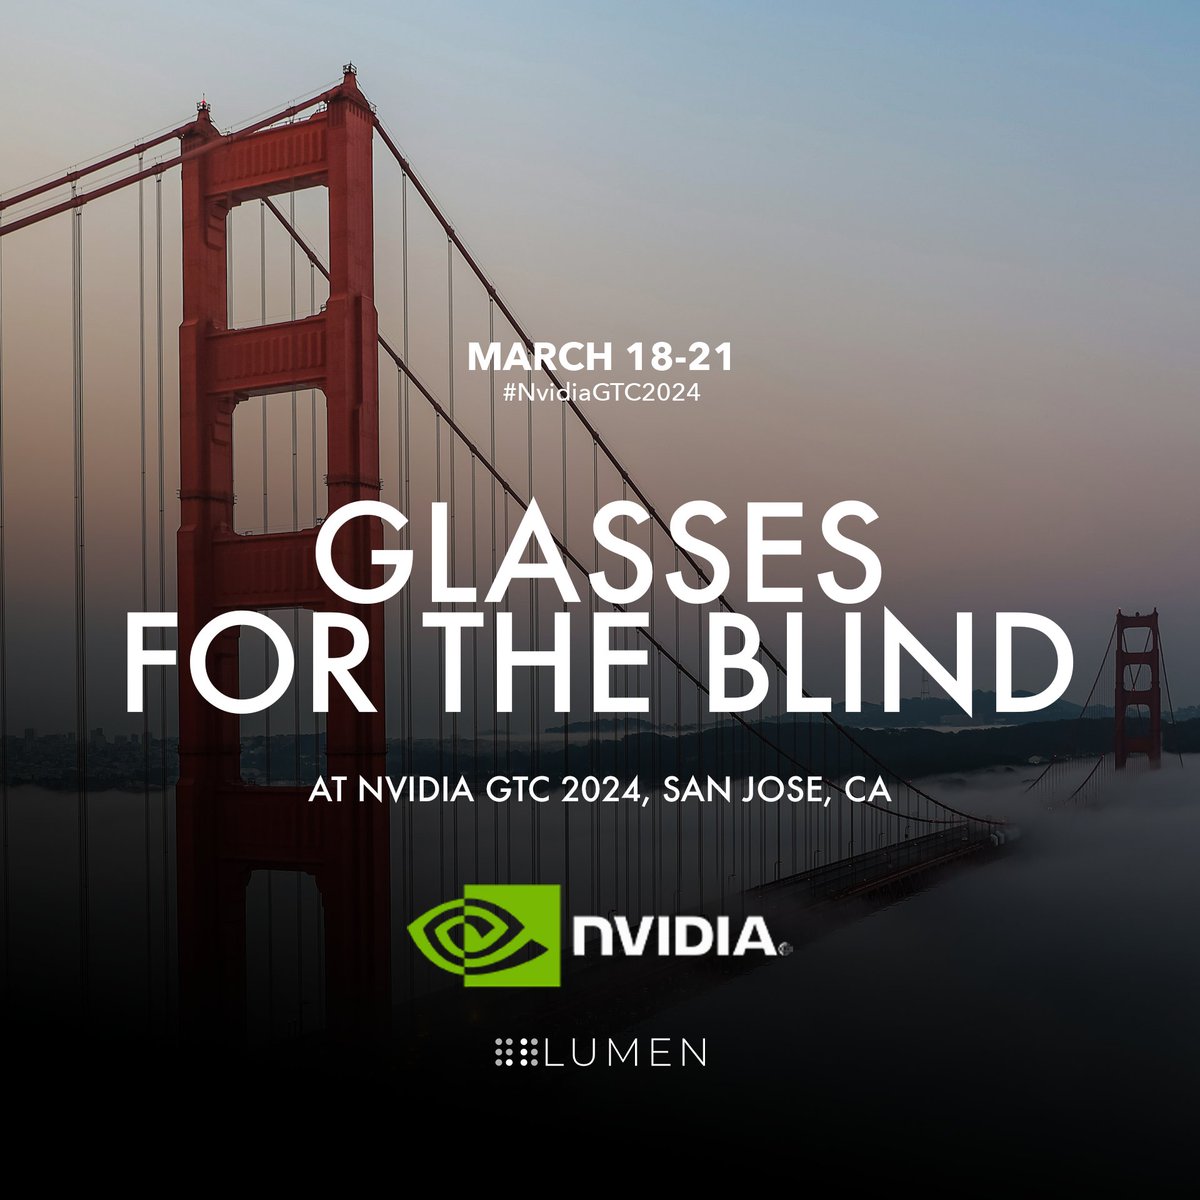 .lumen is showcasing at Nvidia GTC, the #1 AI Developer Conference, in San Jose, California! We've been partners with Nvidia since the beginning, and now we are presenting the .lumen Glasses at the event between 18th and 21st of March. #innovation #assistiveTechnology #nvidia